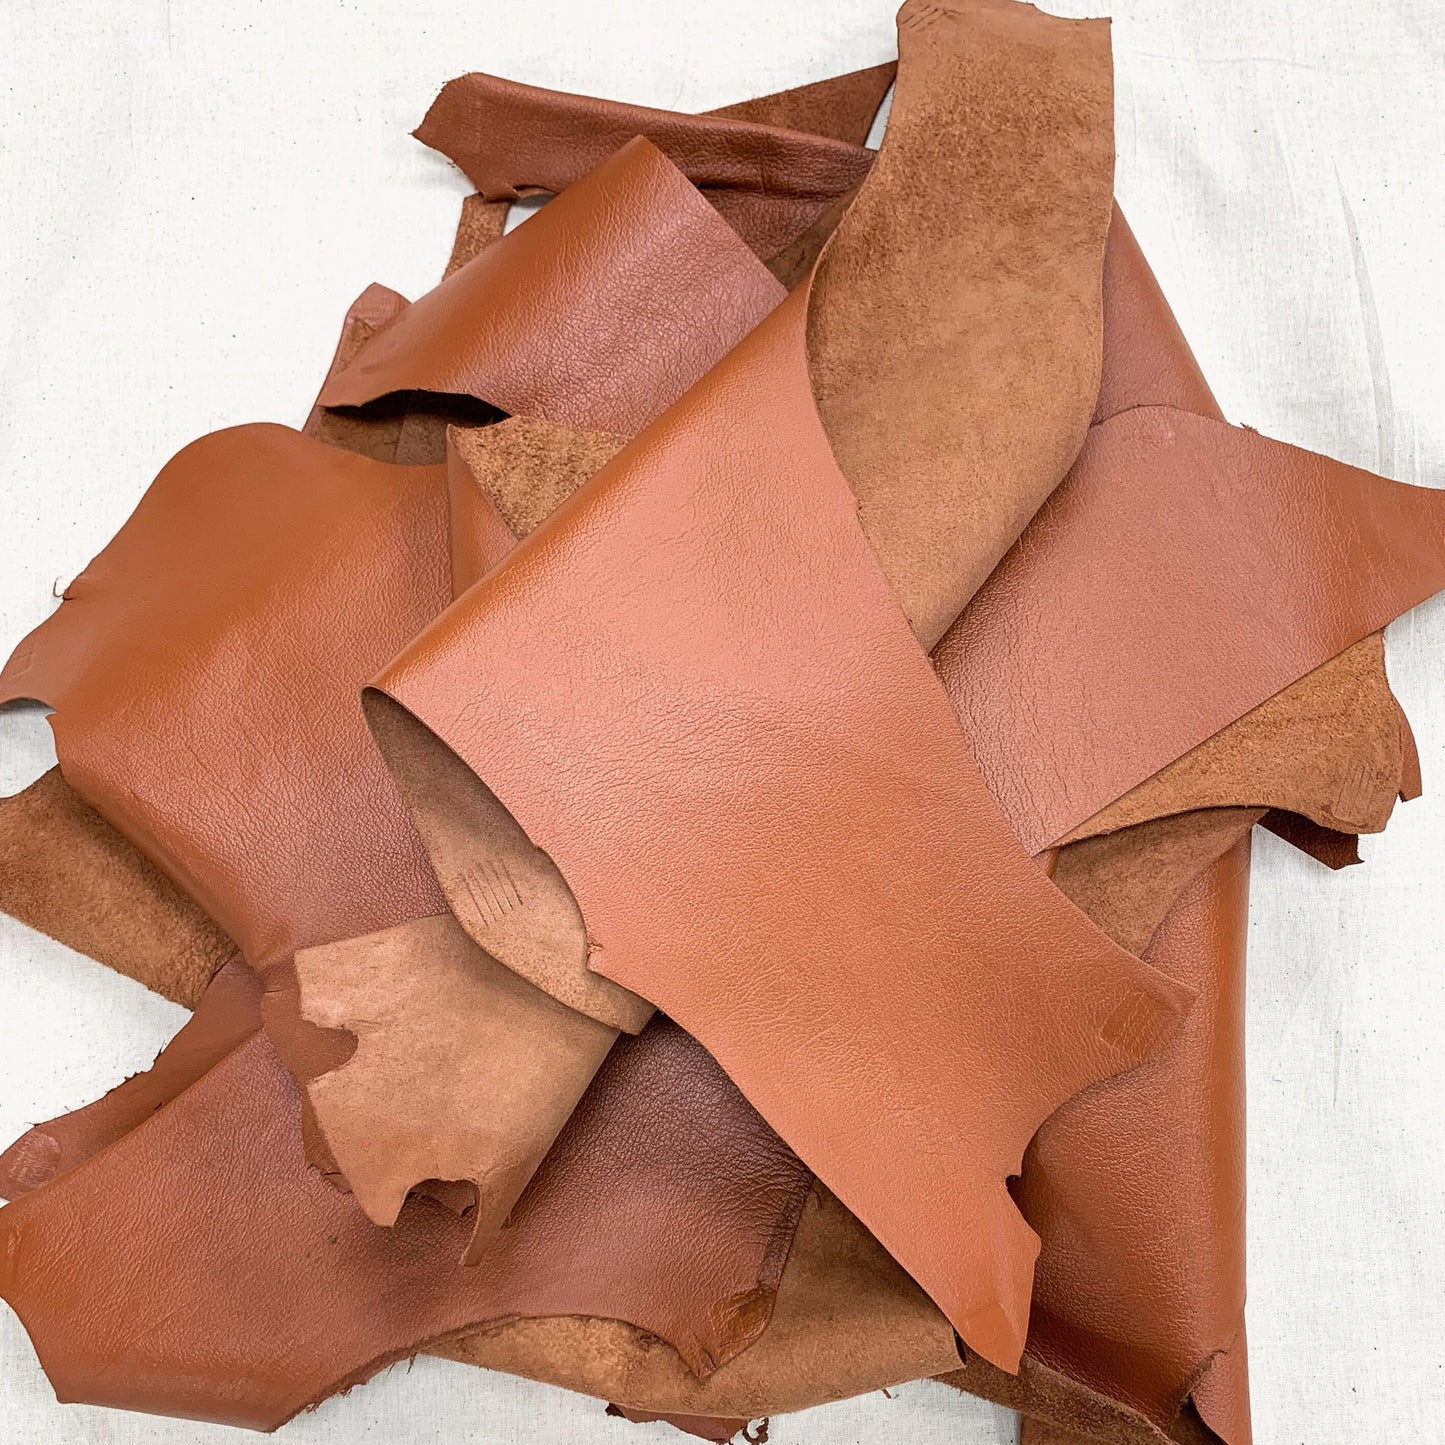 Leather off-cuts 1kg (mixed colours)